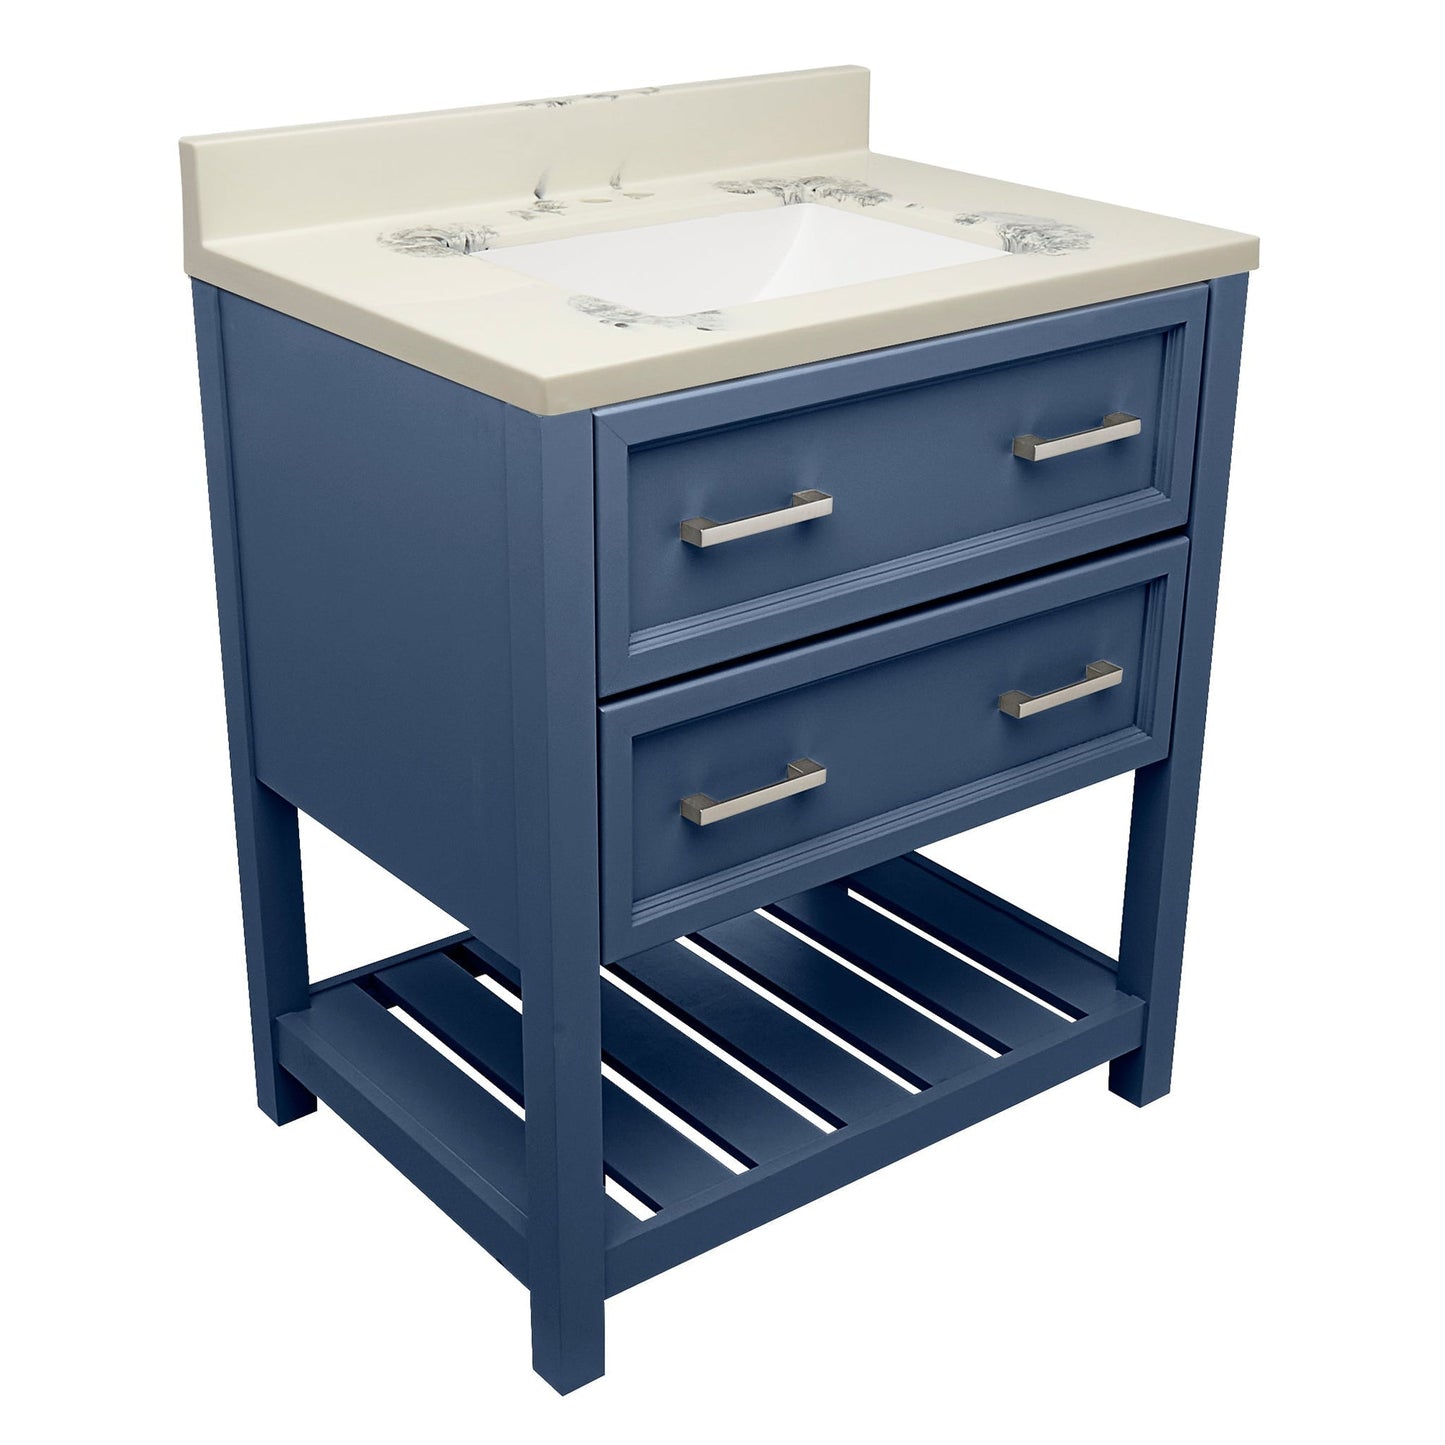 Ella's Bubbles Tremblant 31" Navy Blue Bathroom Vanity With Carrara White Cultured Marble Top With Backsplash and Sink